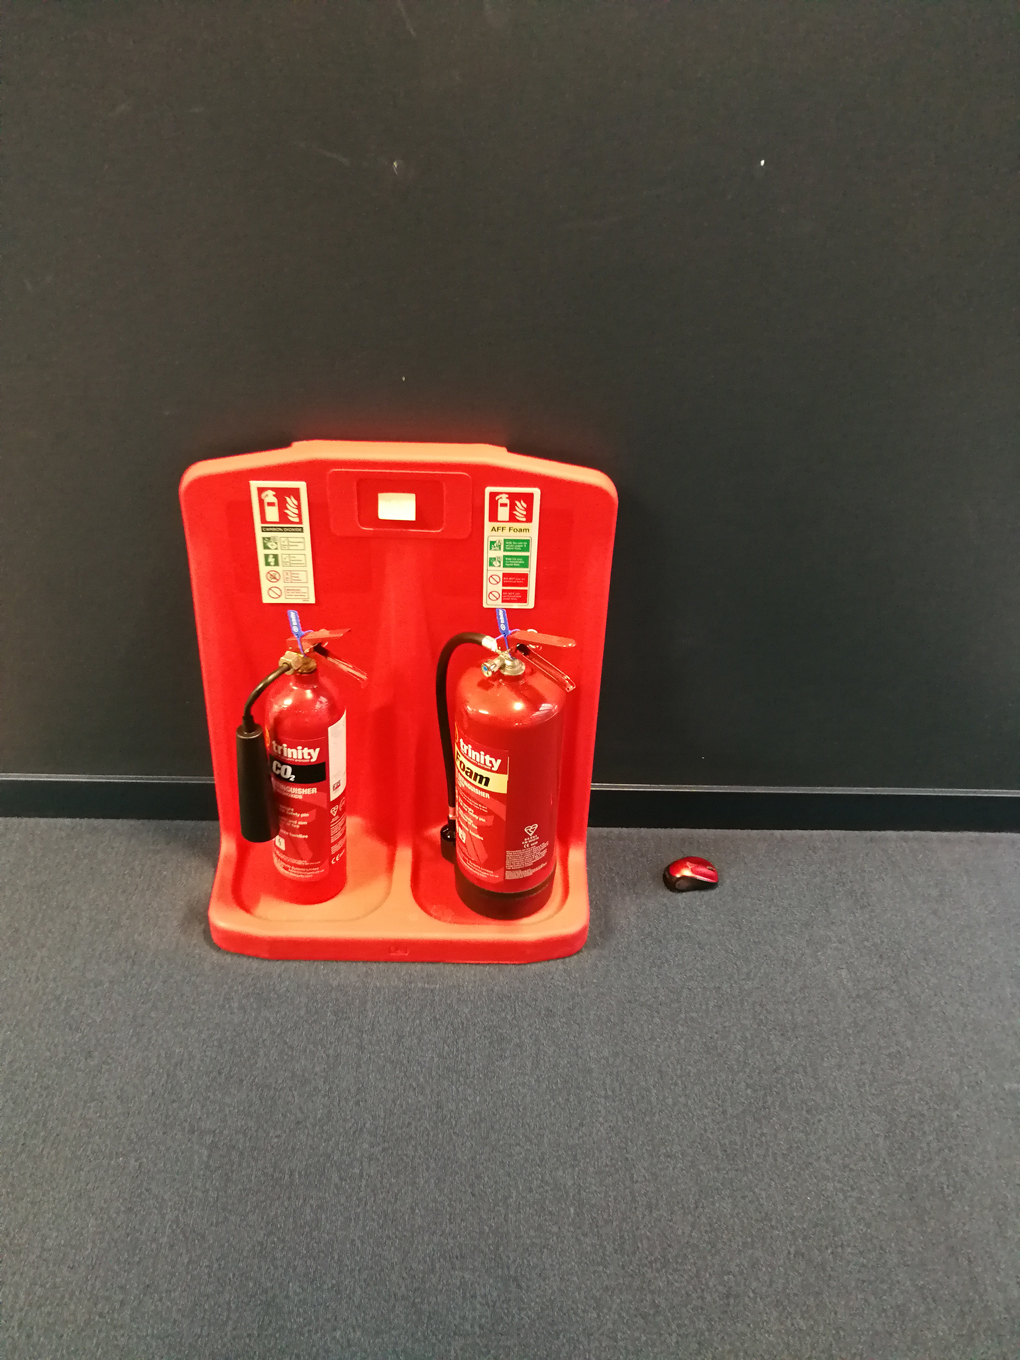 red mouse next to two red fire extinguishers